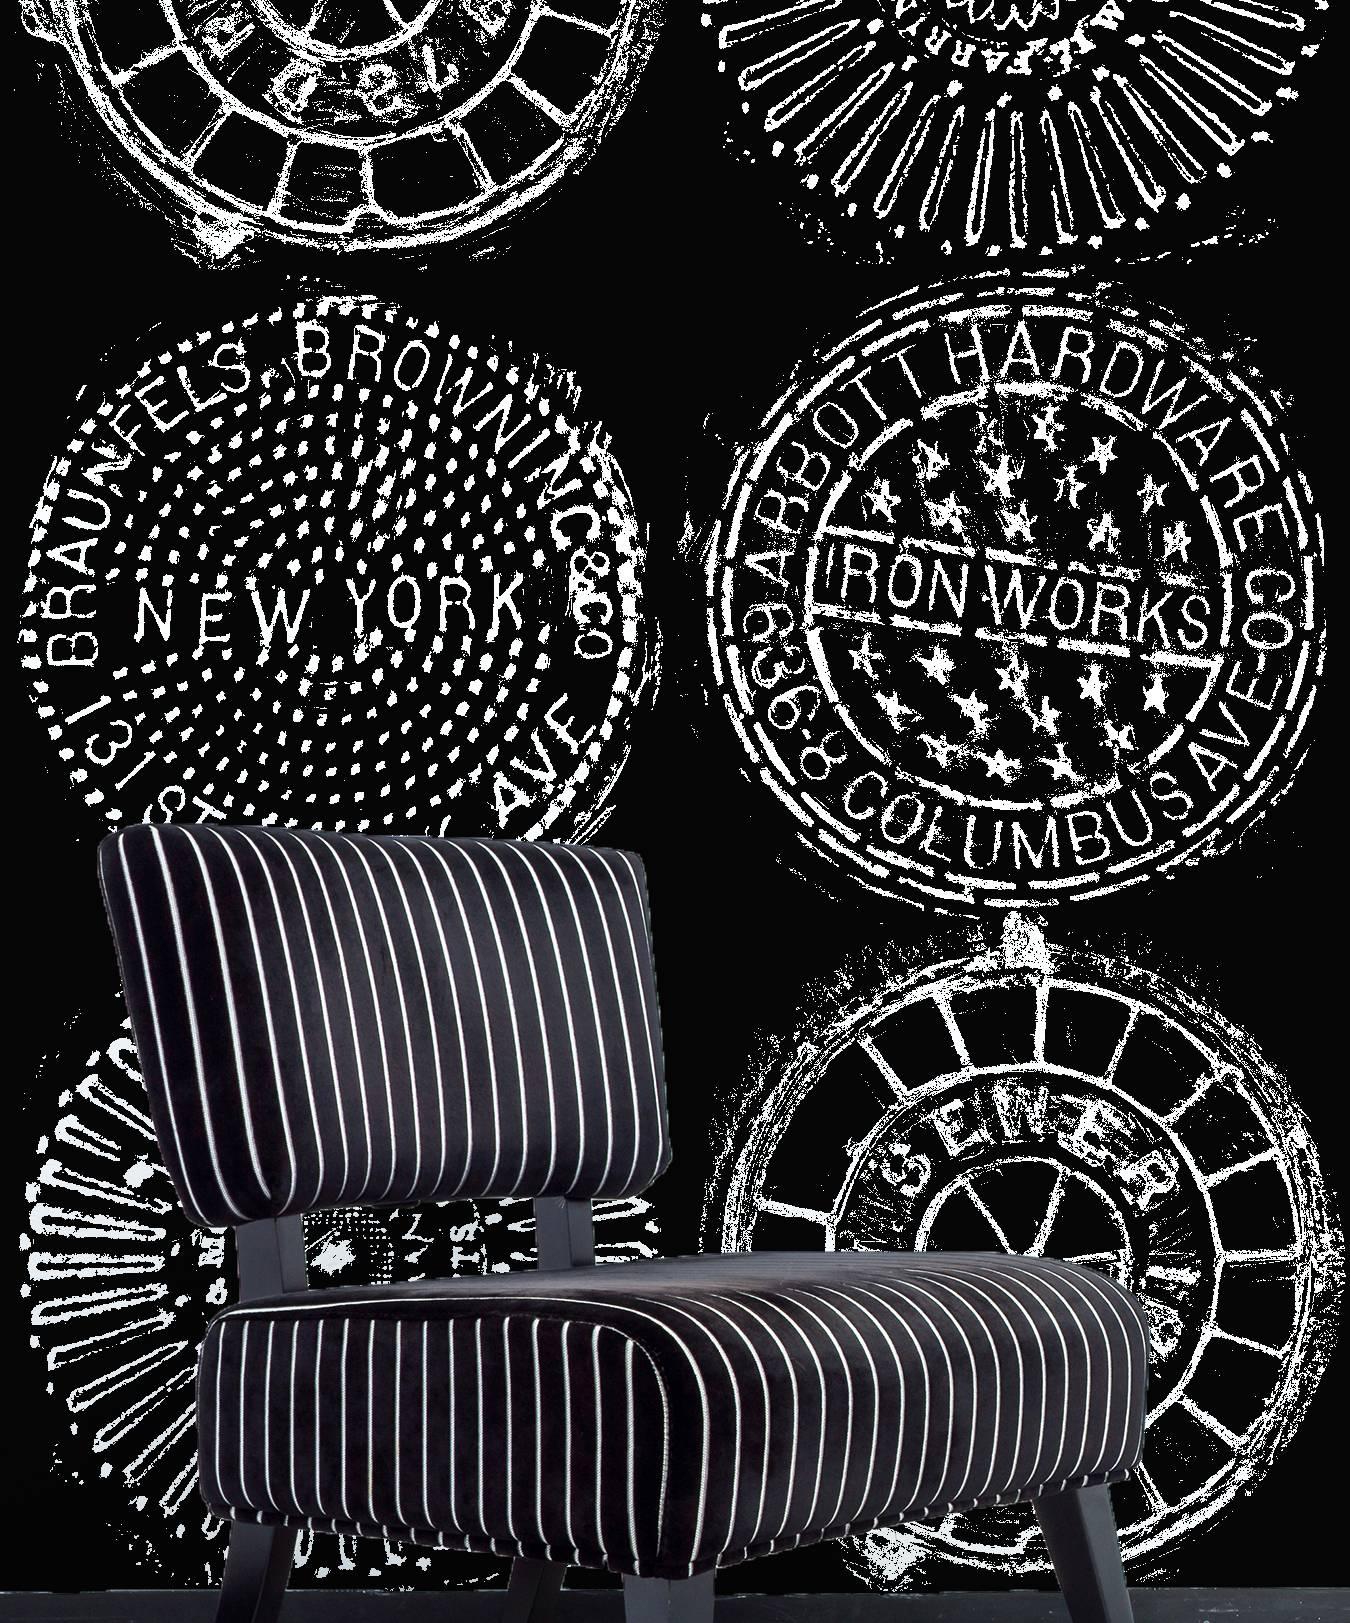 Contemporary NYC Manhole Printed Wallpaper-Black on White Manhole Cover For Sale